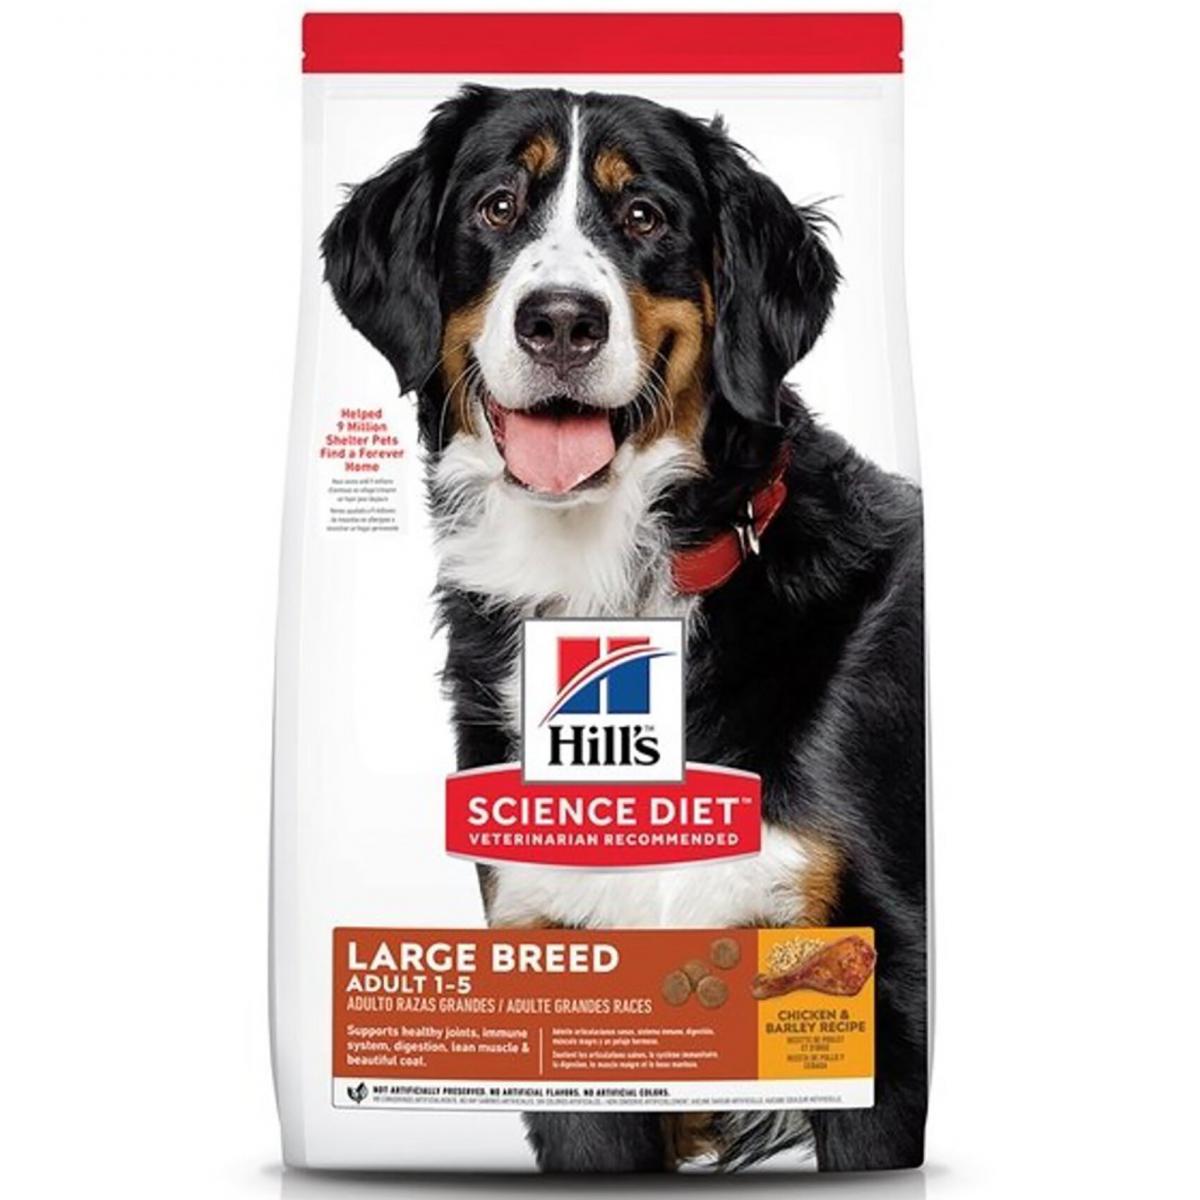 Canine Adult 1-5 Large Breed Chicken & Barley Recipe Dry Dog Food (15KG)